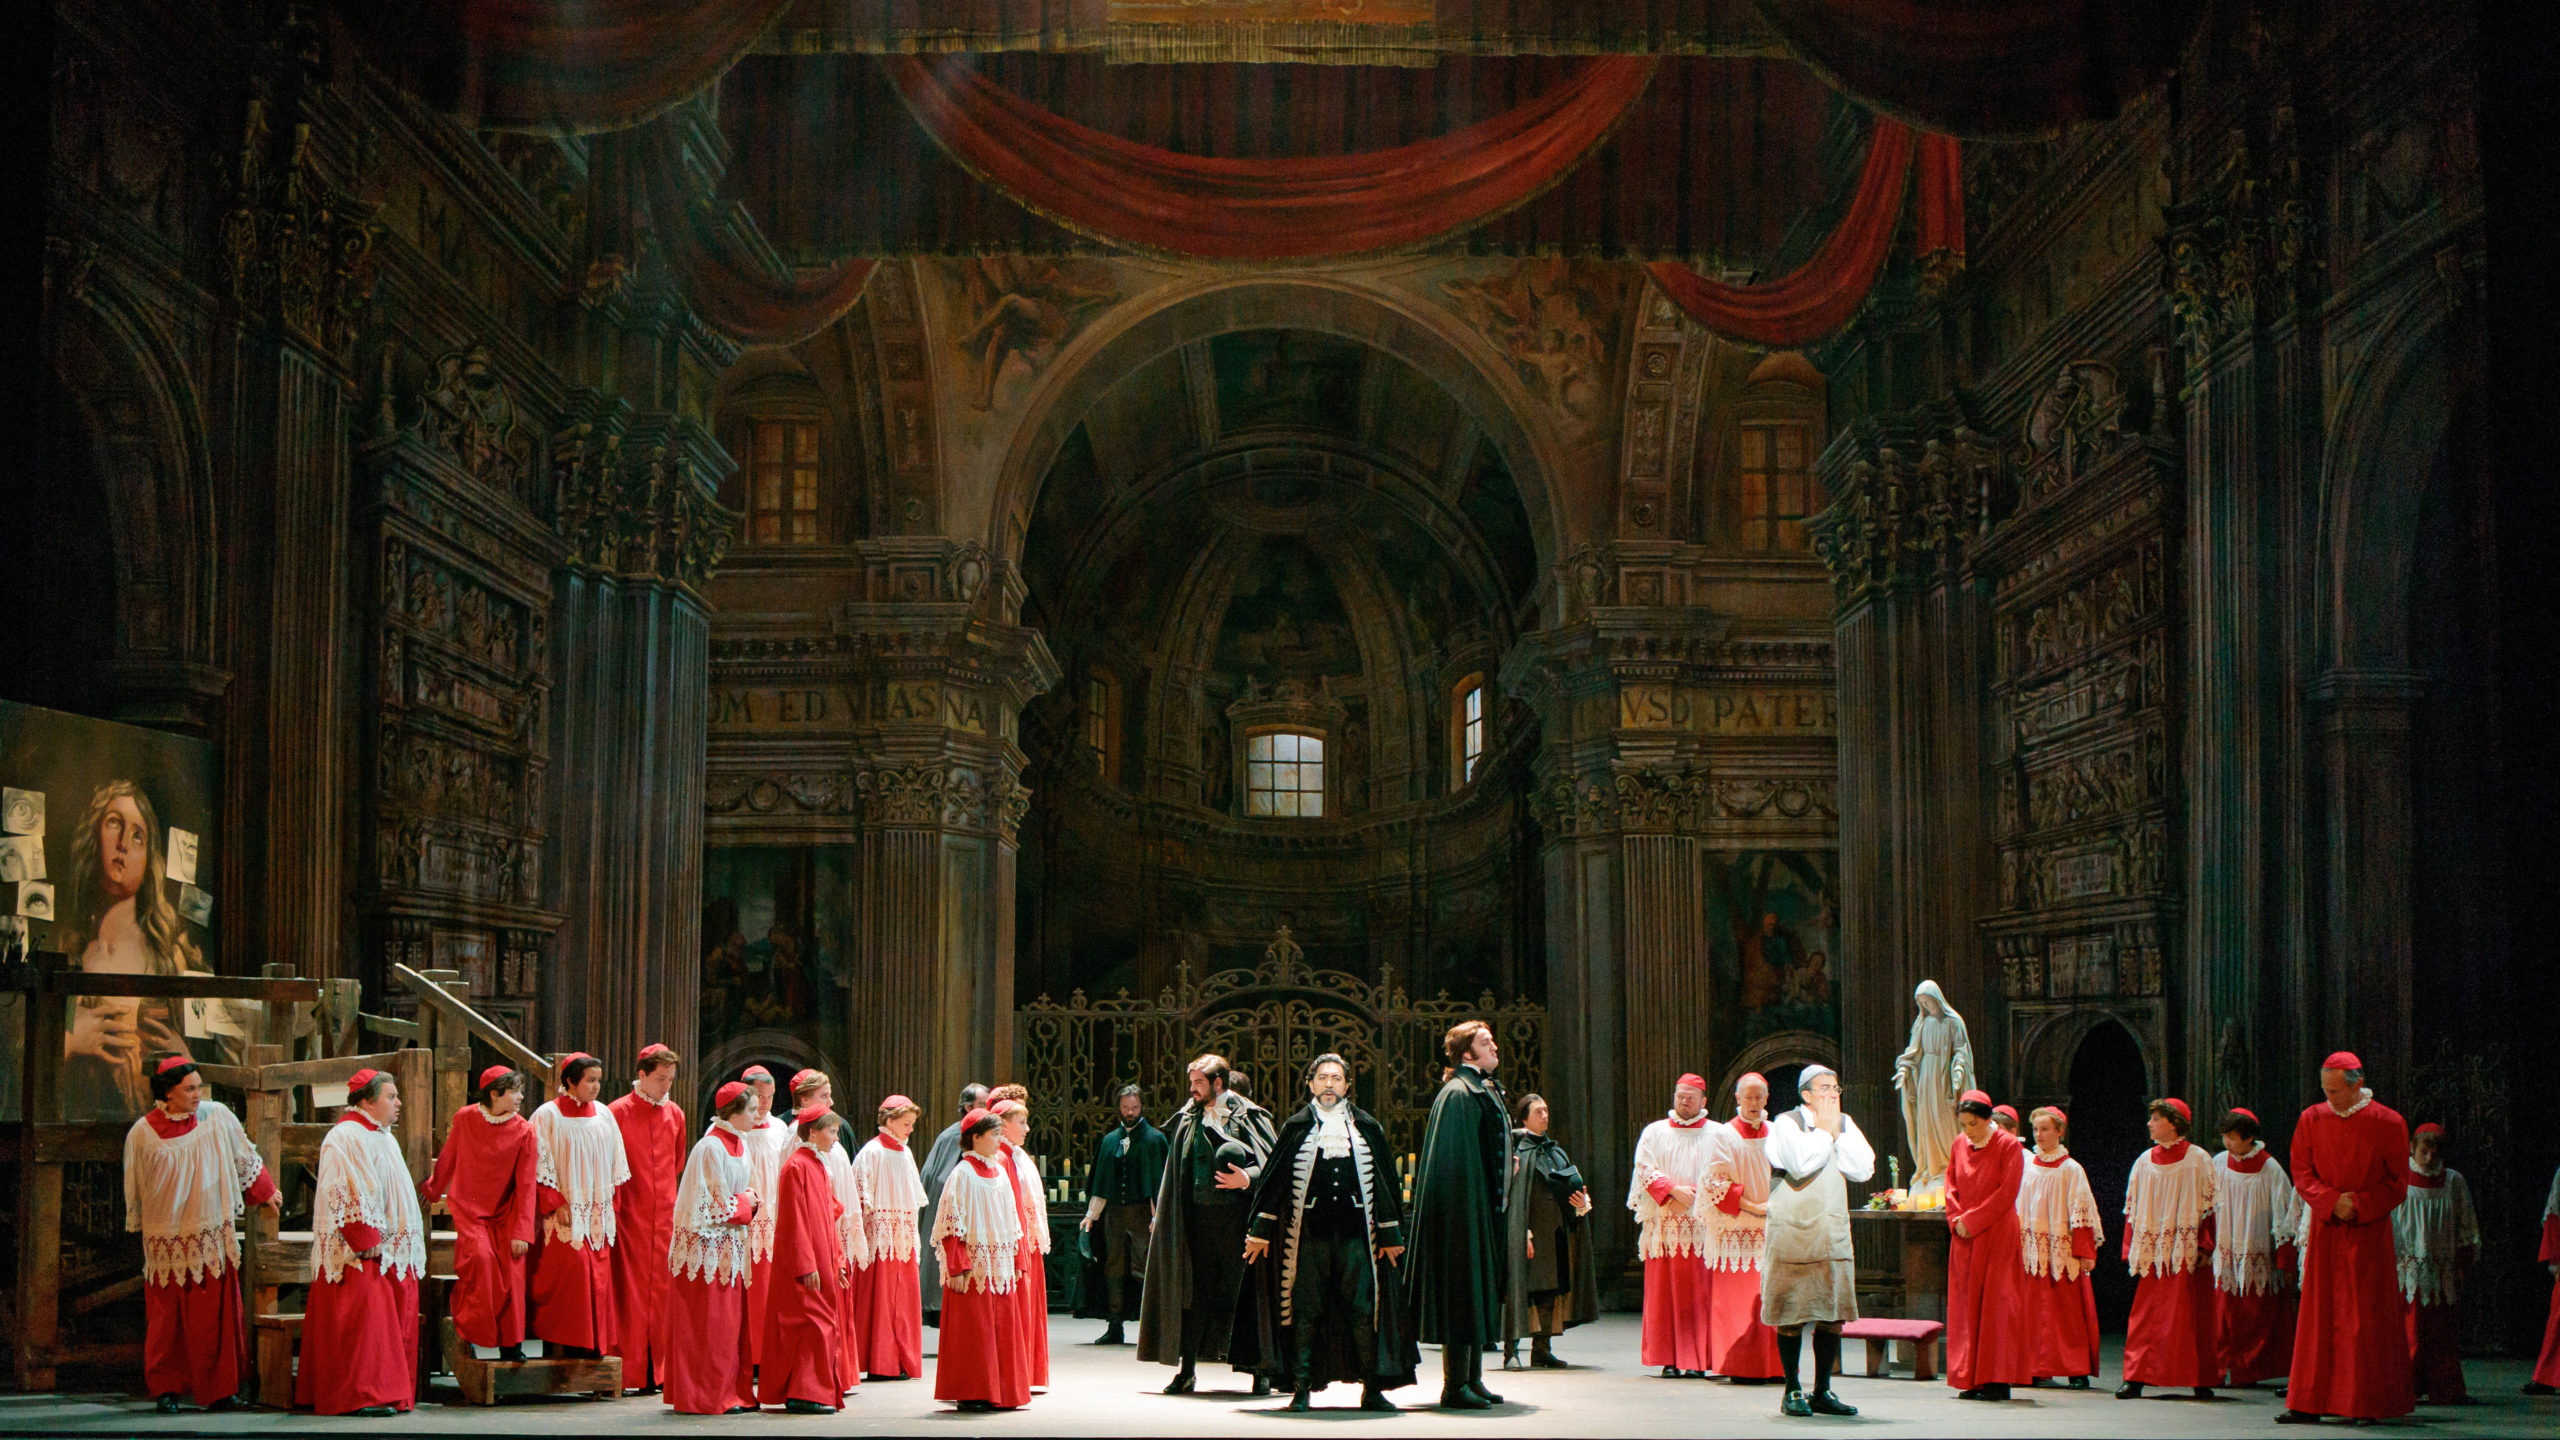 Baritone Luis Ledesma stand powerfully at center stage, flanks on either side by choir boys in red church robes. The set depicts the grand Sant’Andrea della Valle cathedral in Rome.